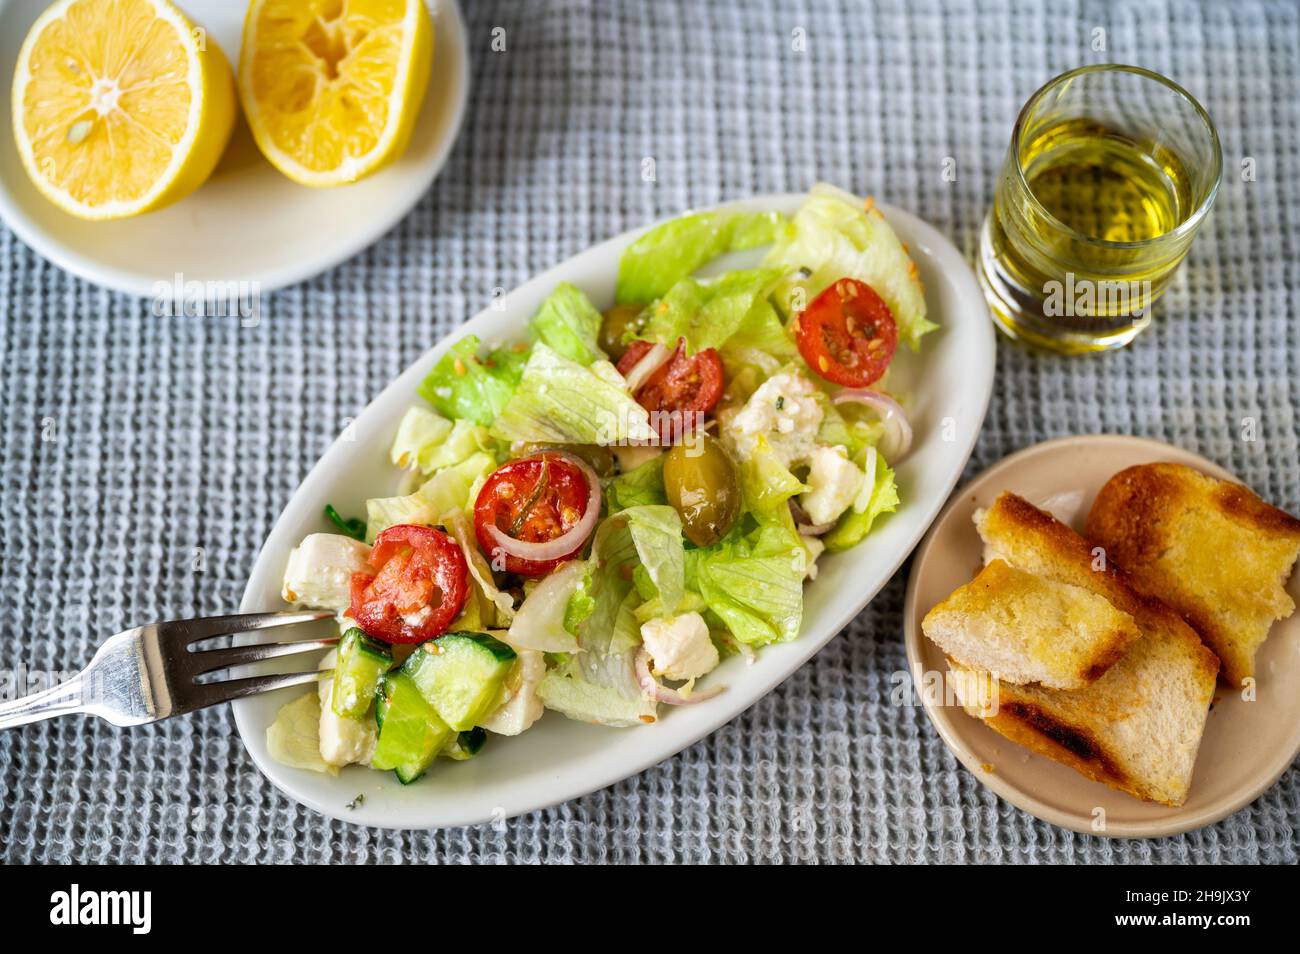 Plate with fresh salad (tomato,lettuce,cheese,cucumber,onion,olive), pastry, lemon and glass of olive oil. Stock Photo